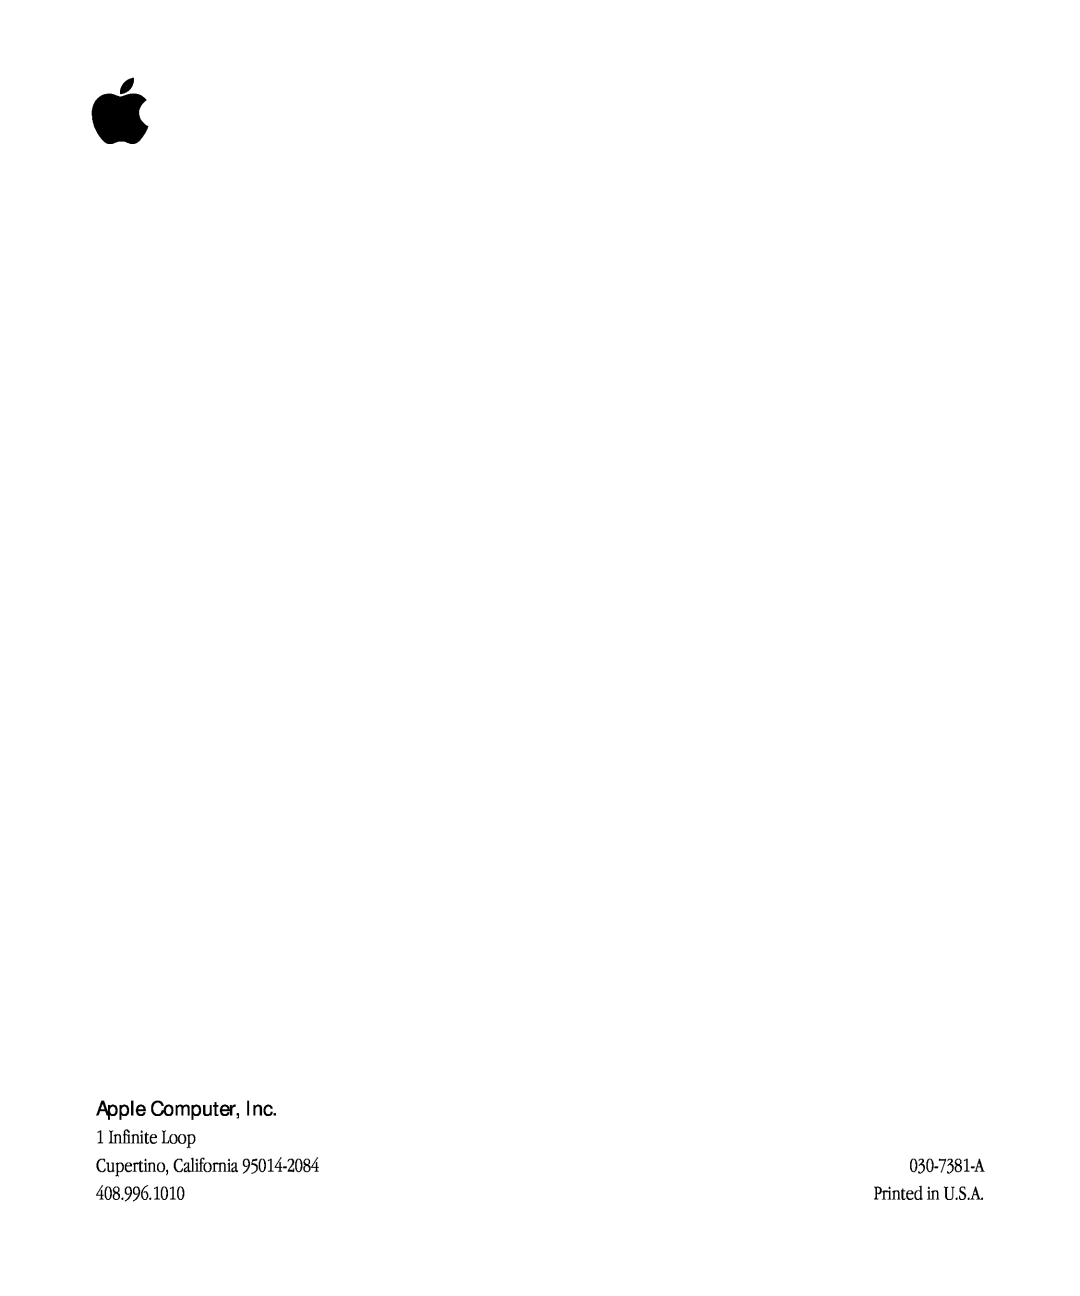 Apple quicktimeconferencing manual Apple Computer, Inc, Infinite Loop, Cupertino, California, 030-7381-A, 408.996.1010 